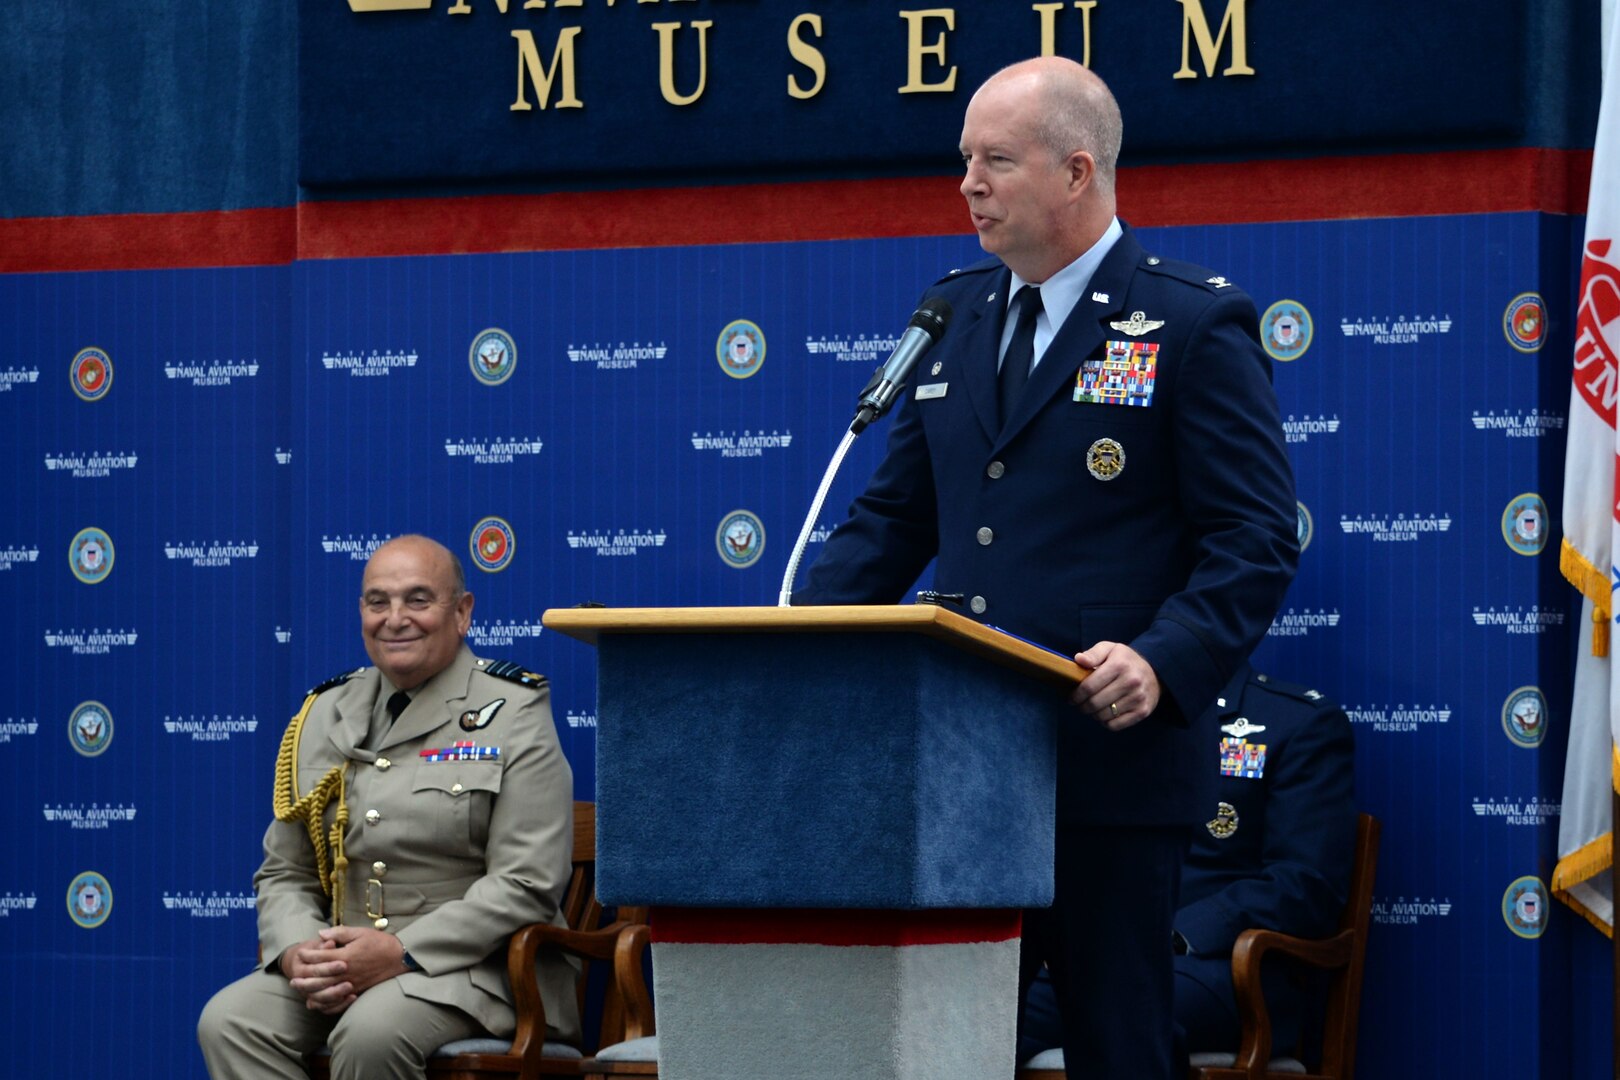 Col. Joel Carey, 12th Flying Training Wing commander provides closing comments as guest speaker while Air Chief Marshal Stuart Peach, Chief of the Defence Staff of the United Kingdom looks on during the Combat Systems Officer graduation, inside the National Naval Aviation Museum at Naval Air Station Pensacola, Florida, June 23, 2017. 